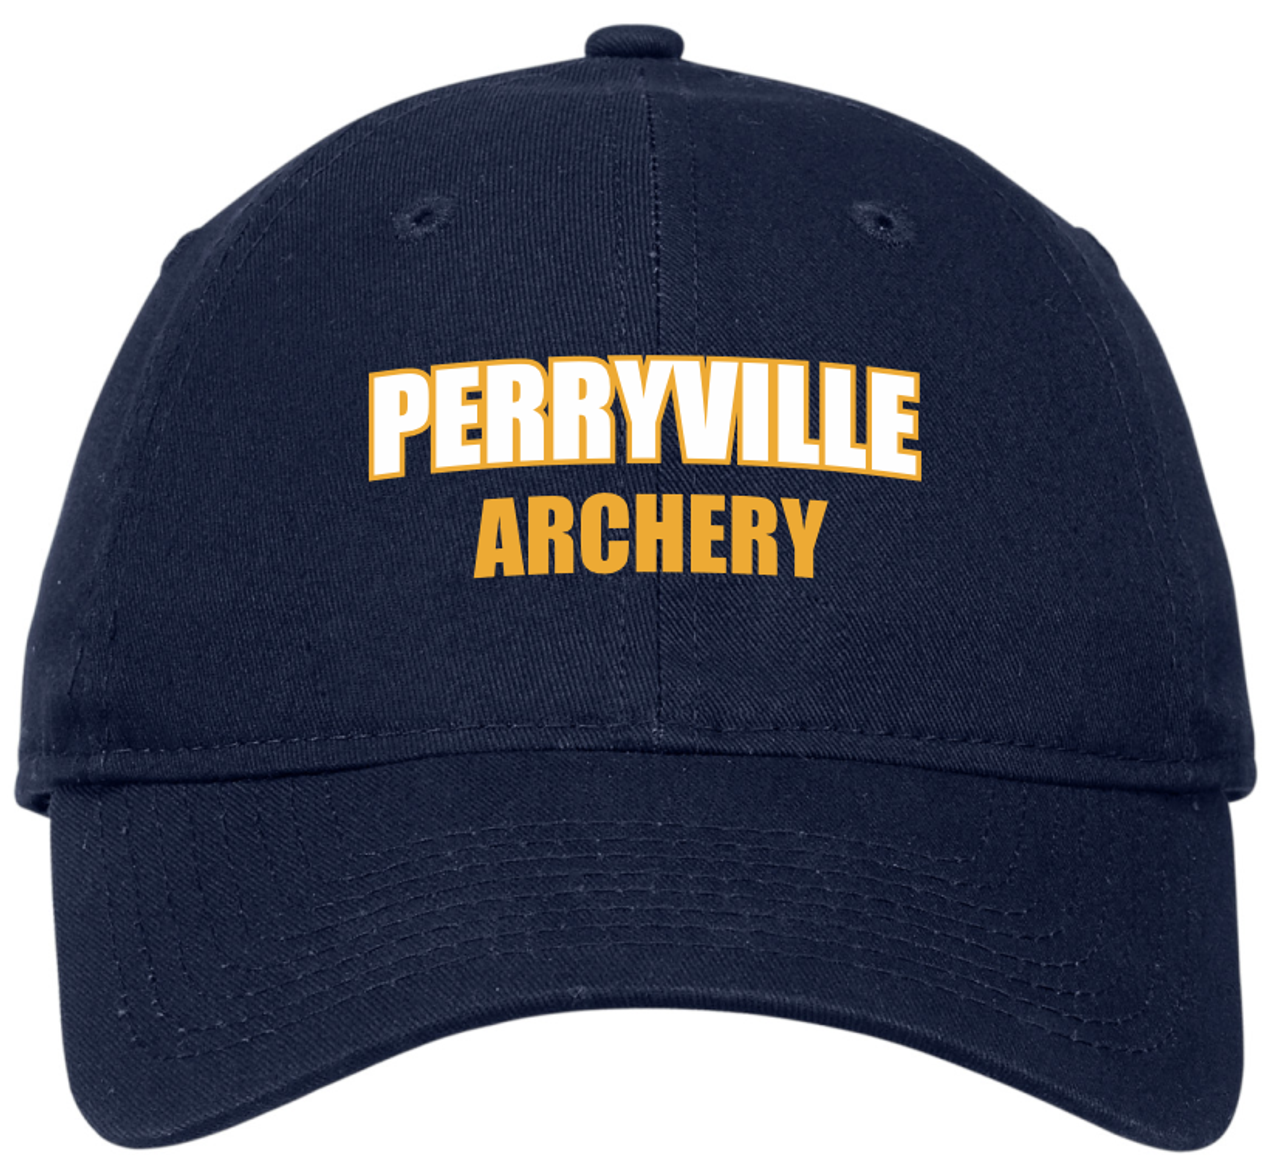 Perryville MS Archery Adjustable Hat